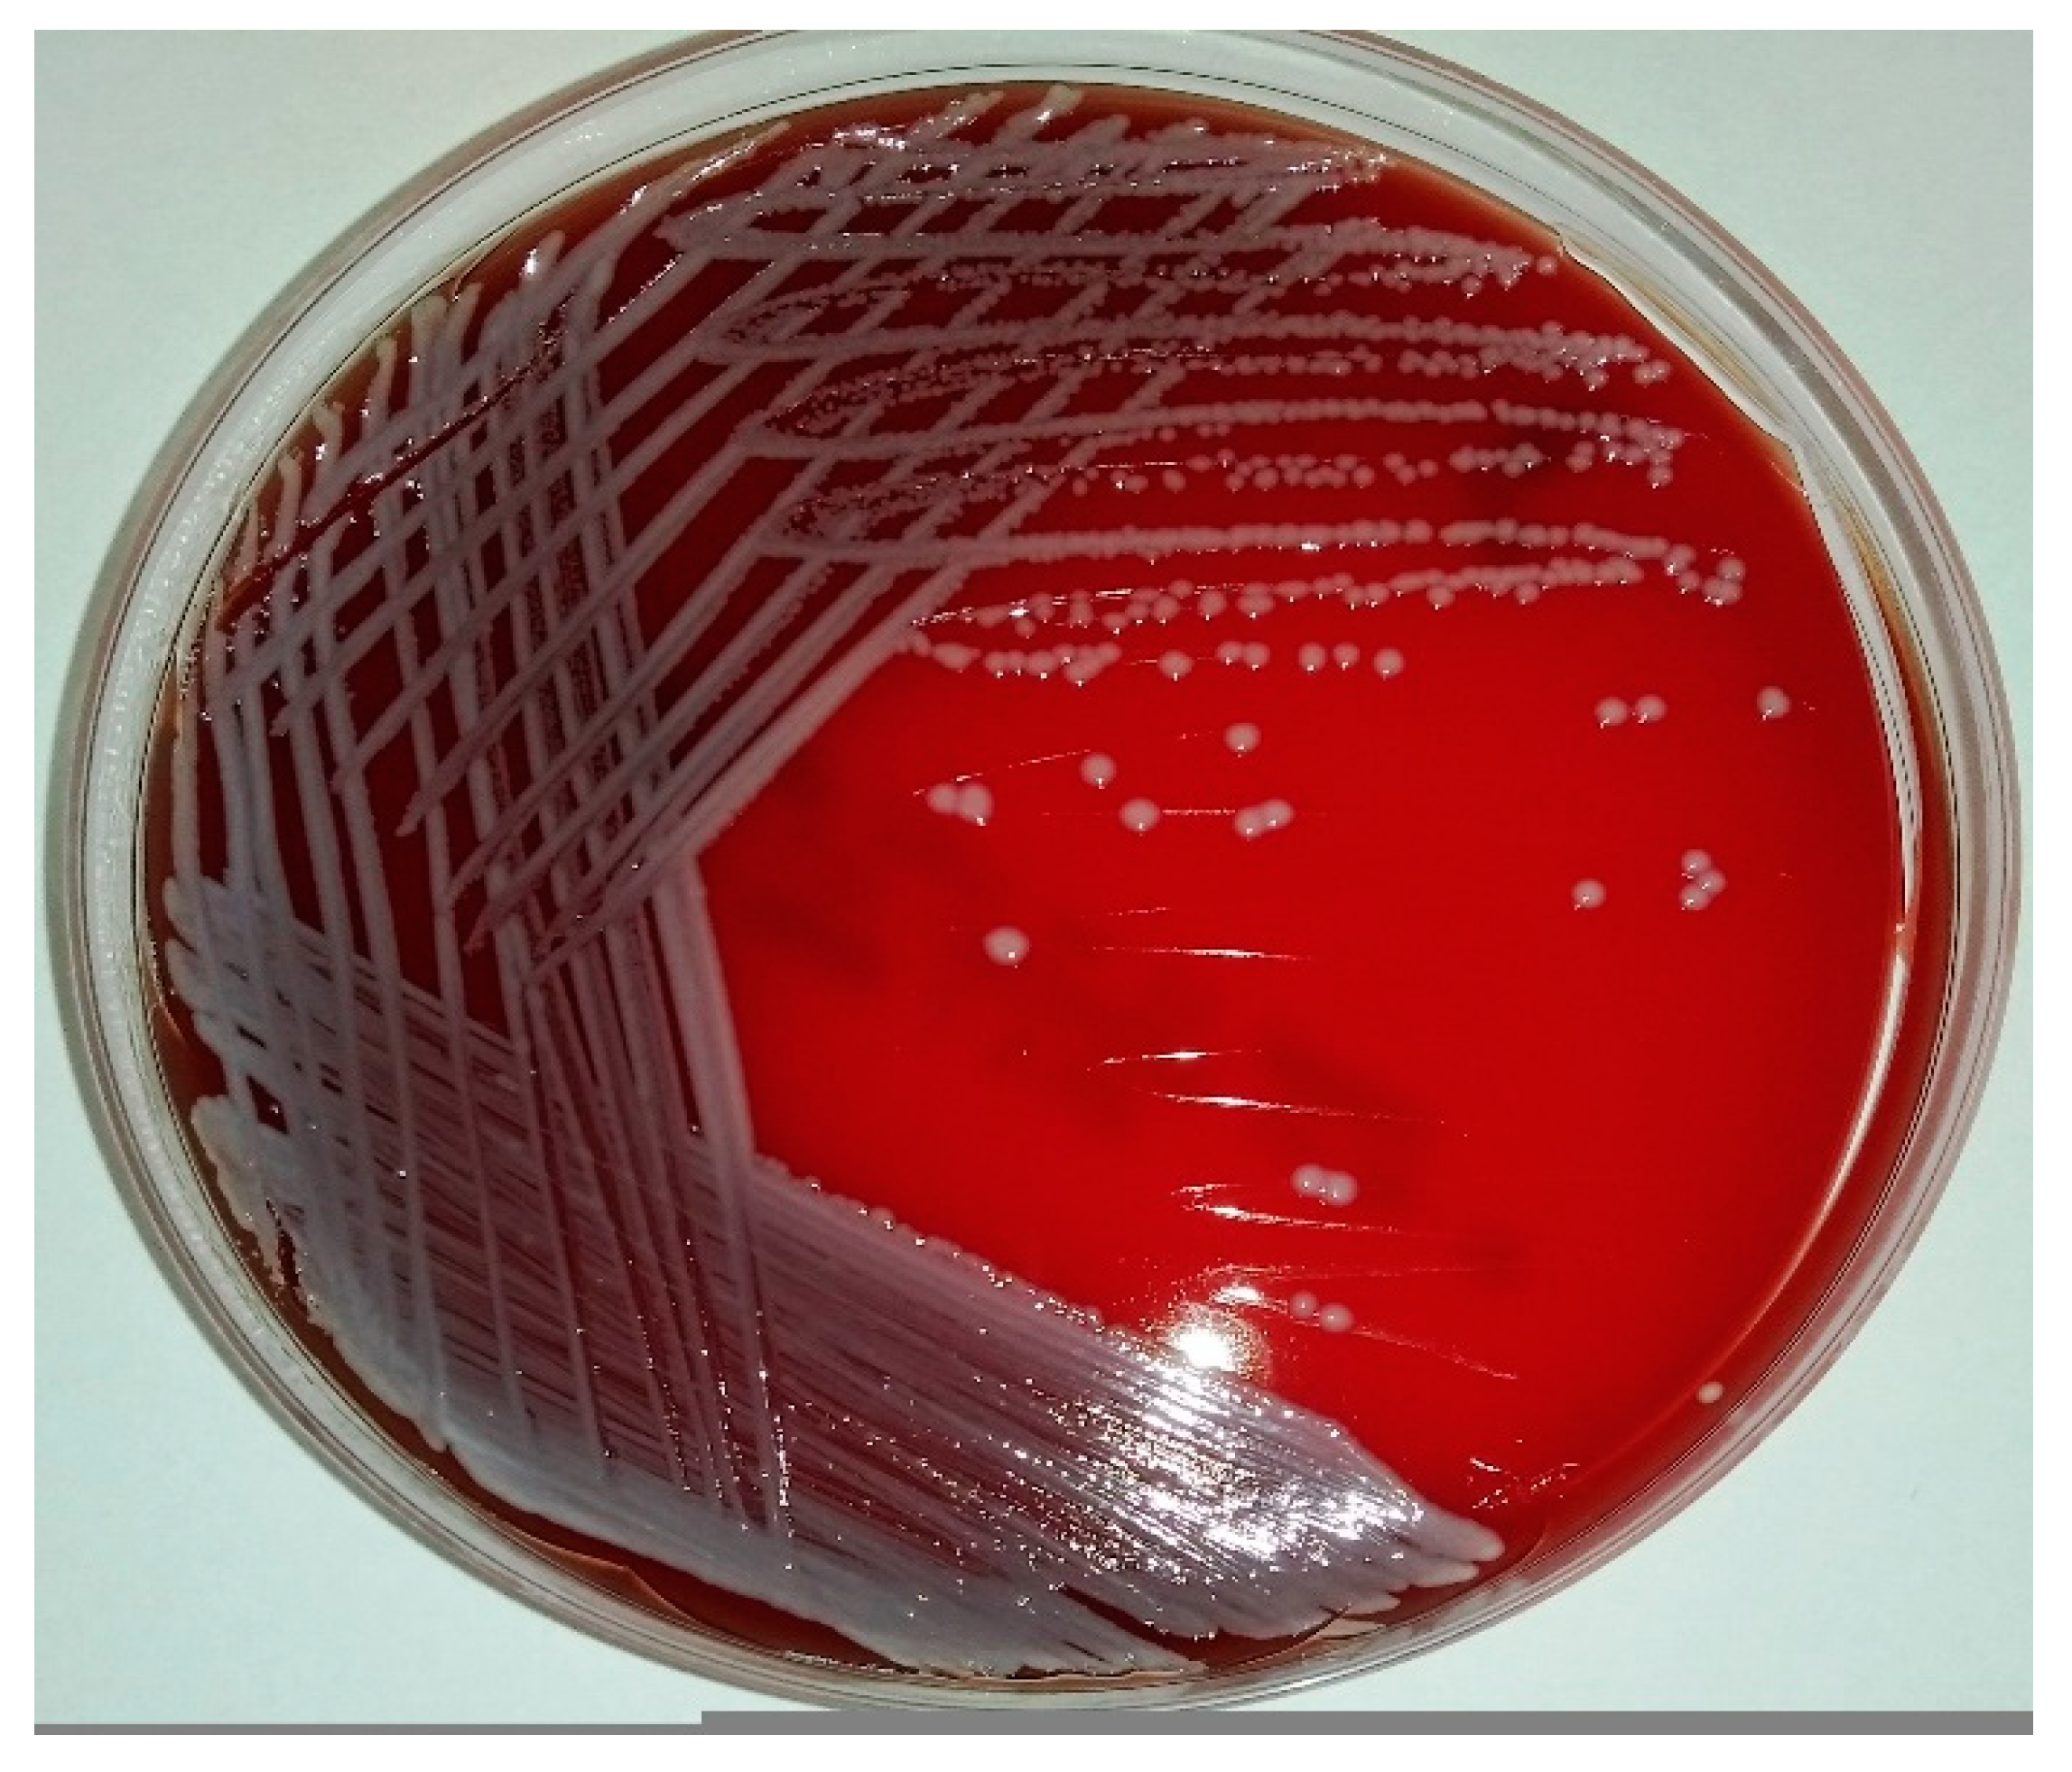 Staphylococcus: Most Up-to-Date Encyclopedia, News & Reviews